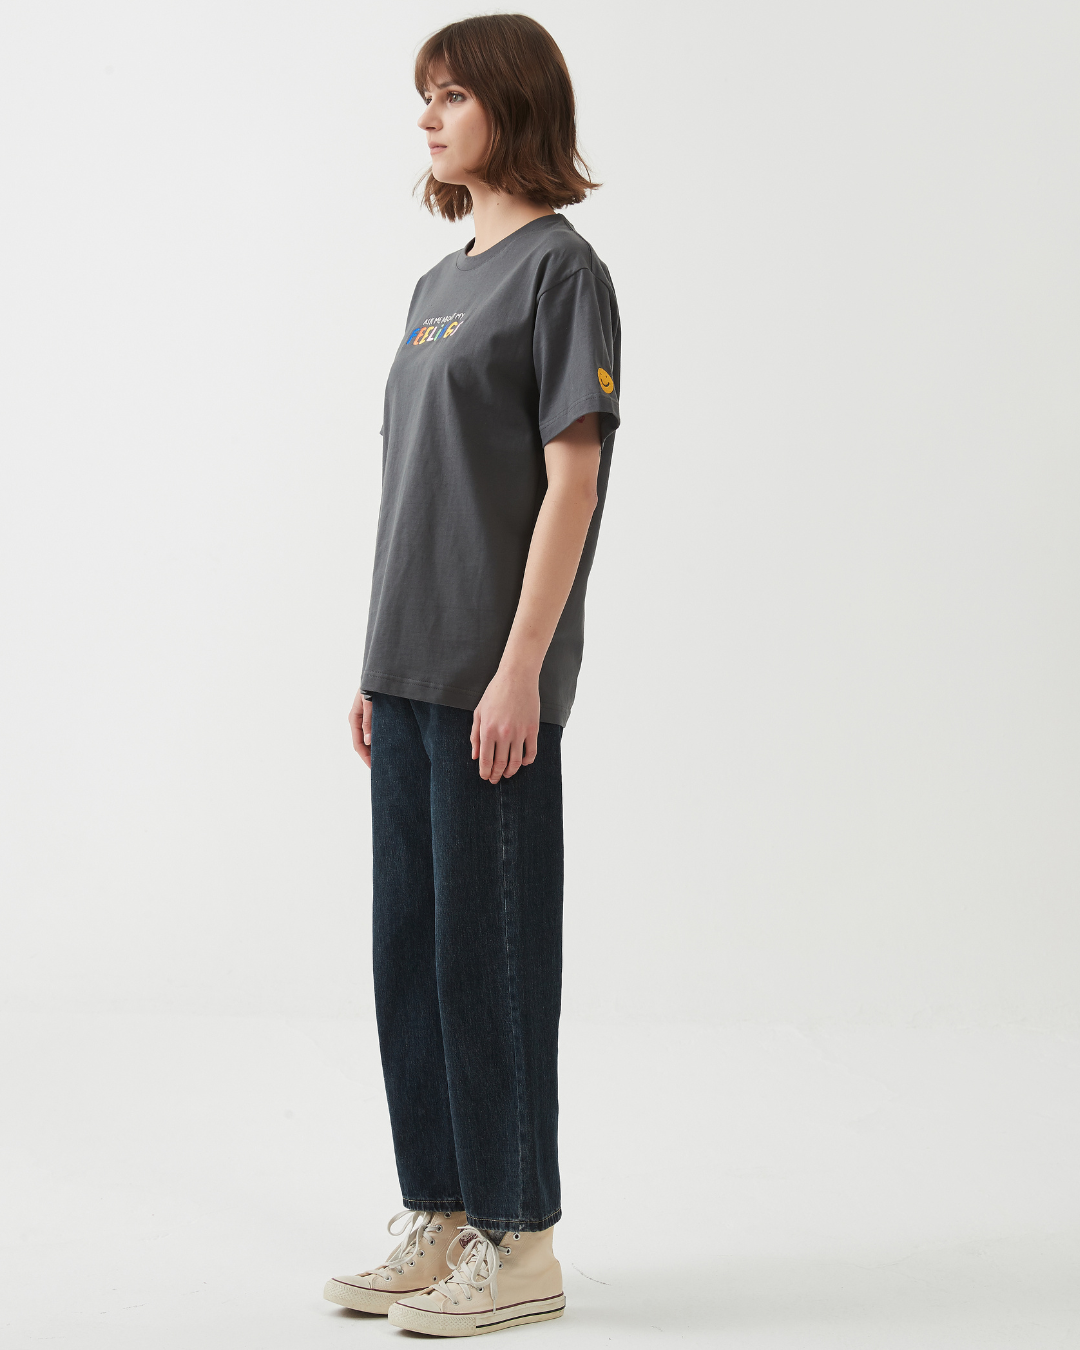 Ask Me About My Feelings Embroidery Oversized Tee In Grey